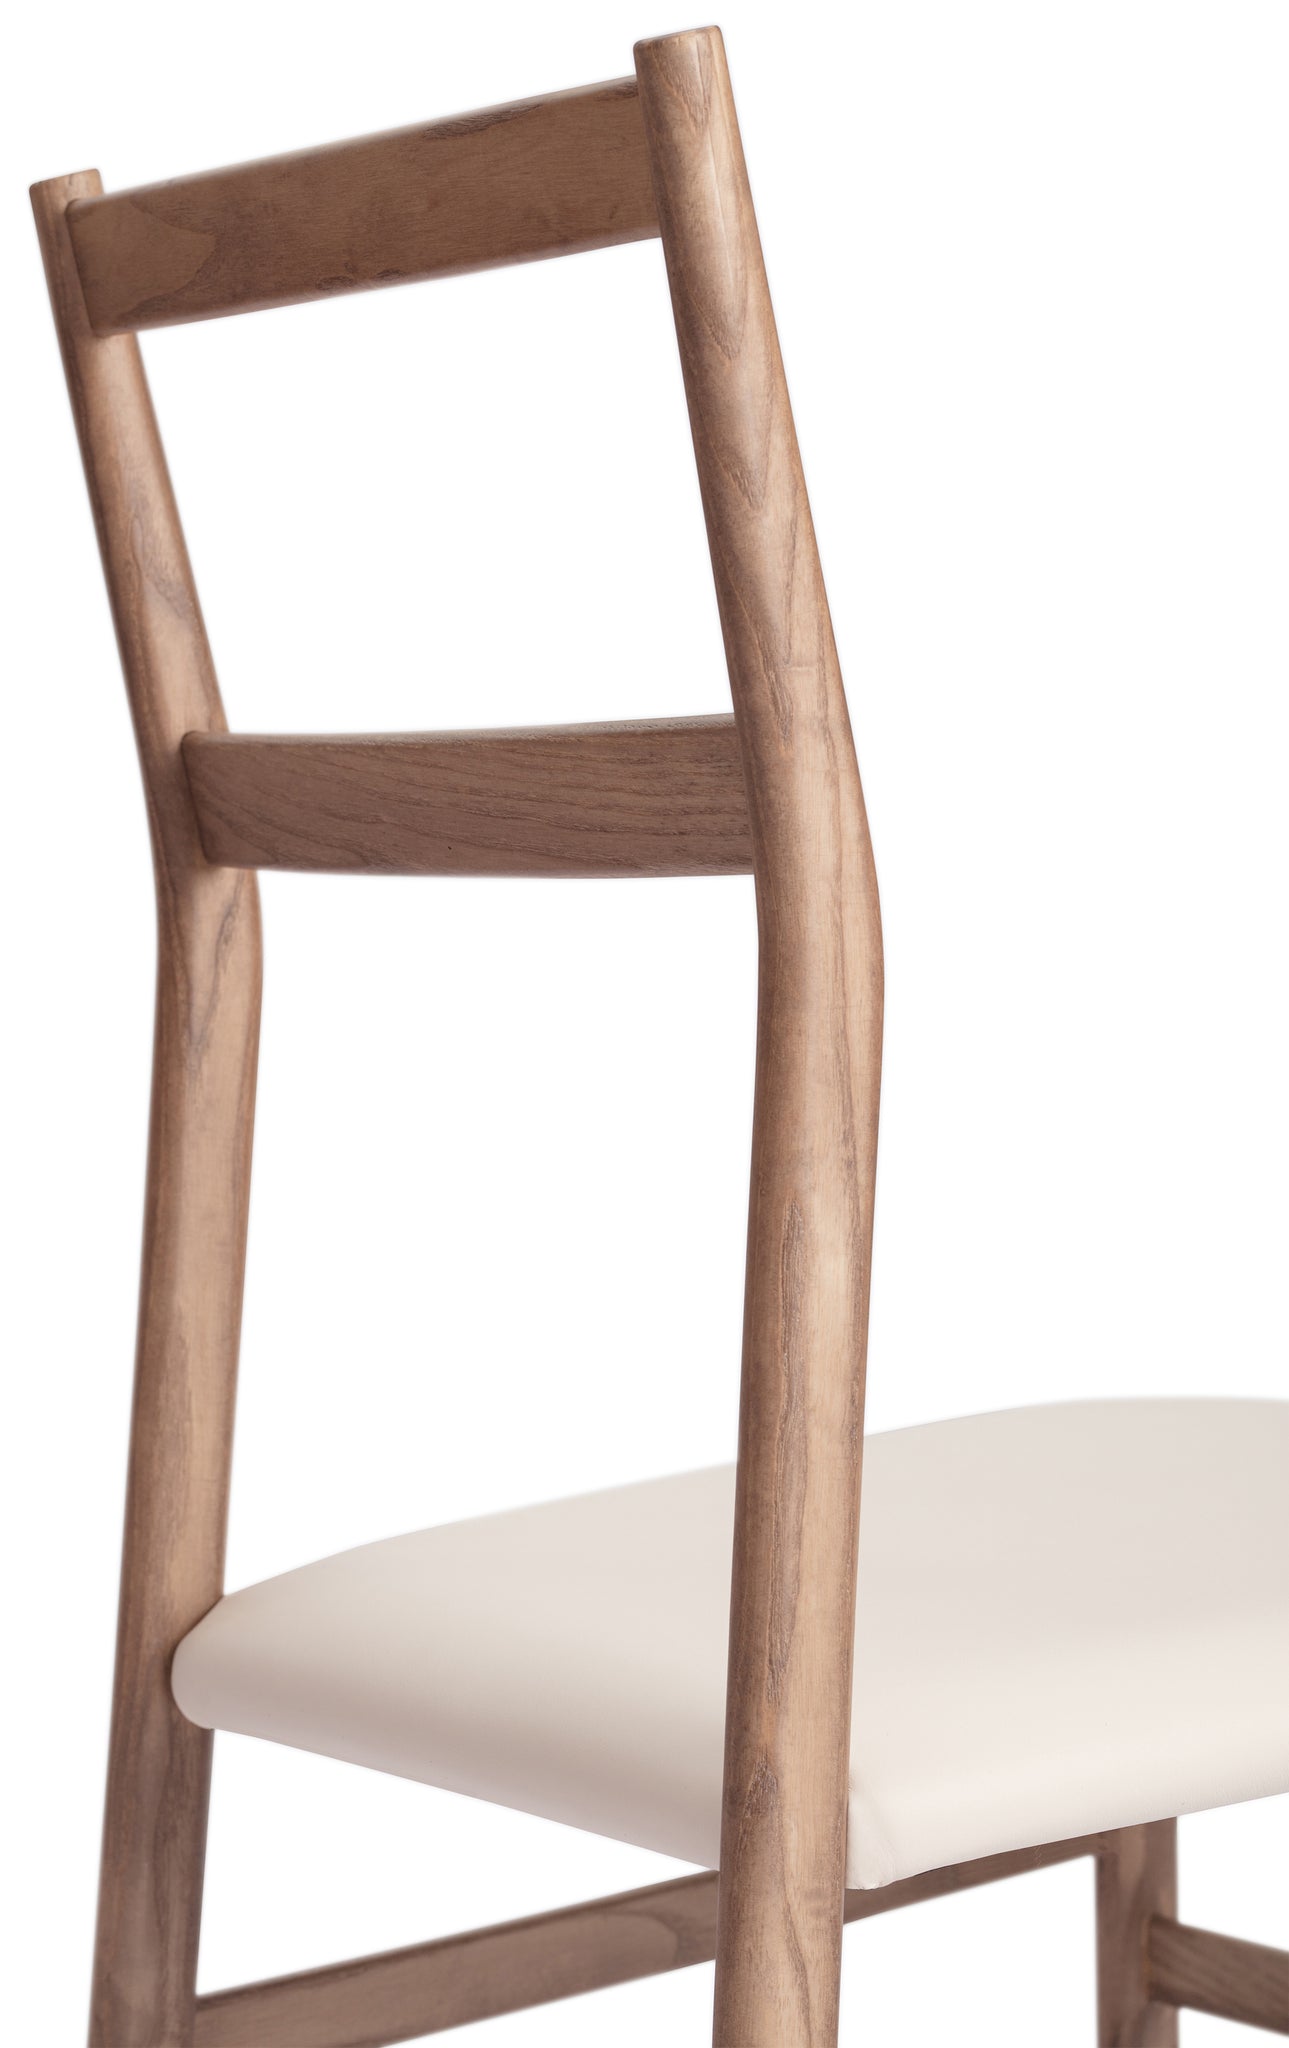 Close-up 1 of a Snella Modern Side Chair, walnut stained ash frame, soft white leather seat, closely resembling the superleggera chair by Gio Ponti, ultra-lightweight at 5 lbs, contract grade. Manufactured by Klarel in Italy. #K42-4